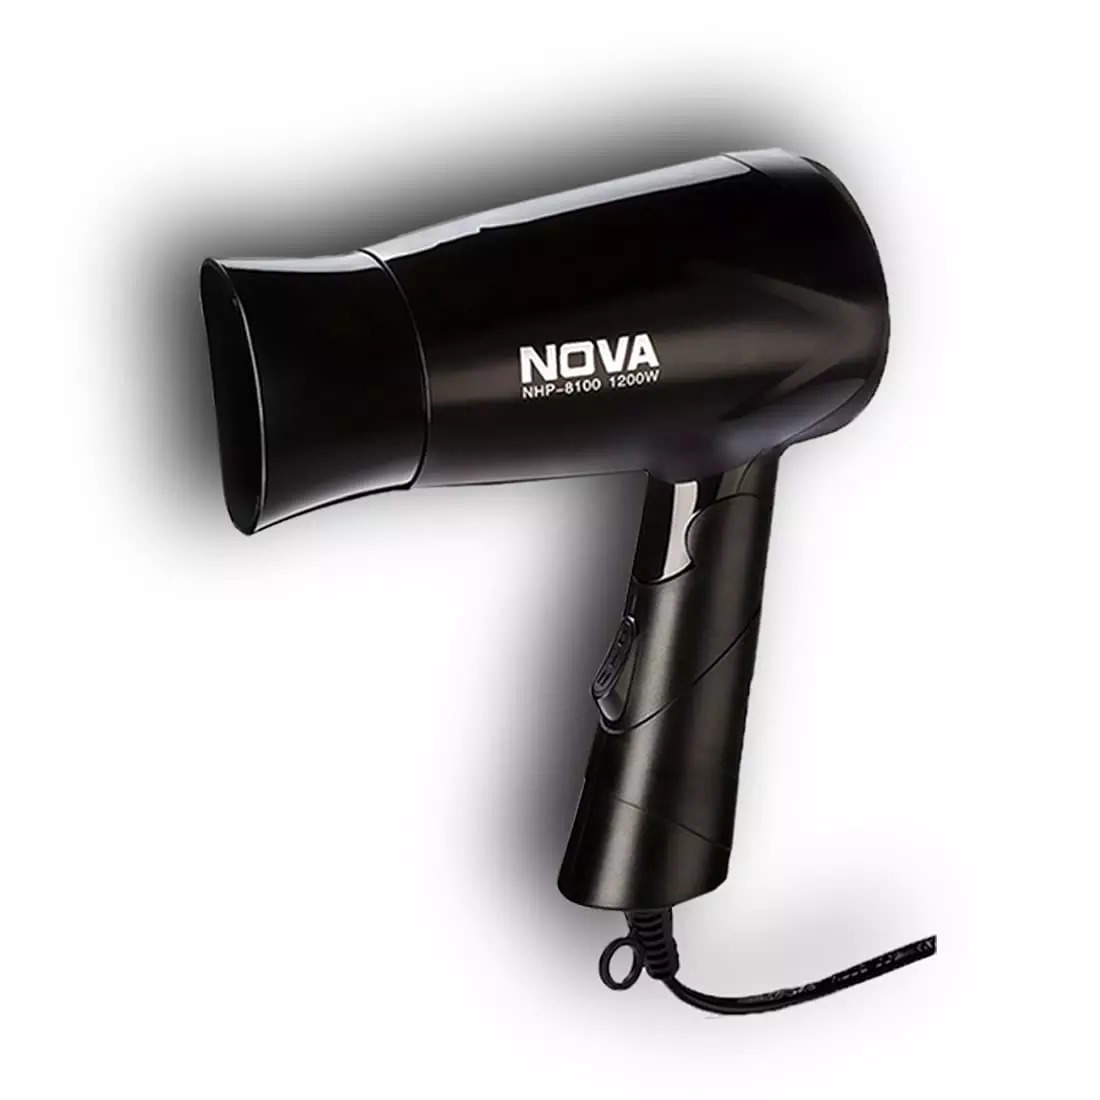 Buy These Best Hair Dryer Under 1000 Rupees Online on Amazon सदर आण  आकरषक कससठ आजच ऑरडर कर ह Best Hair Dryer